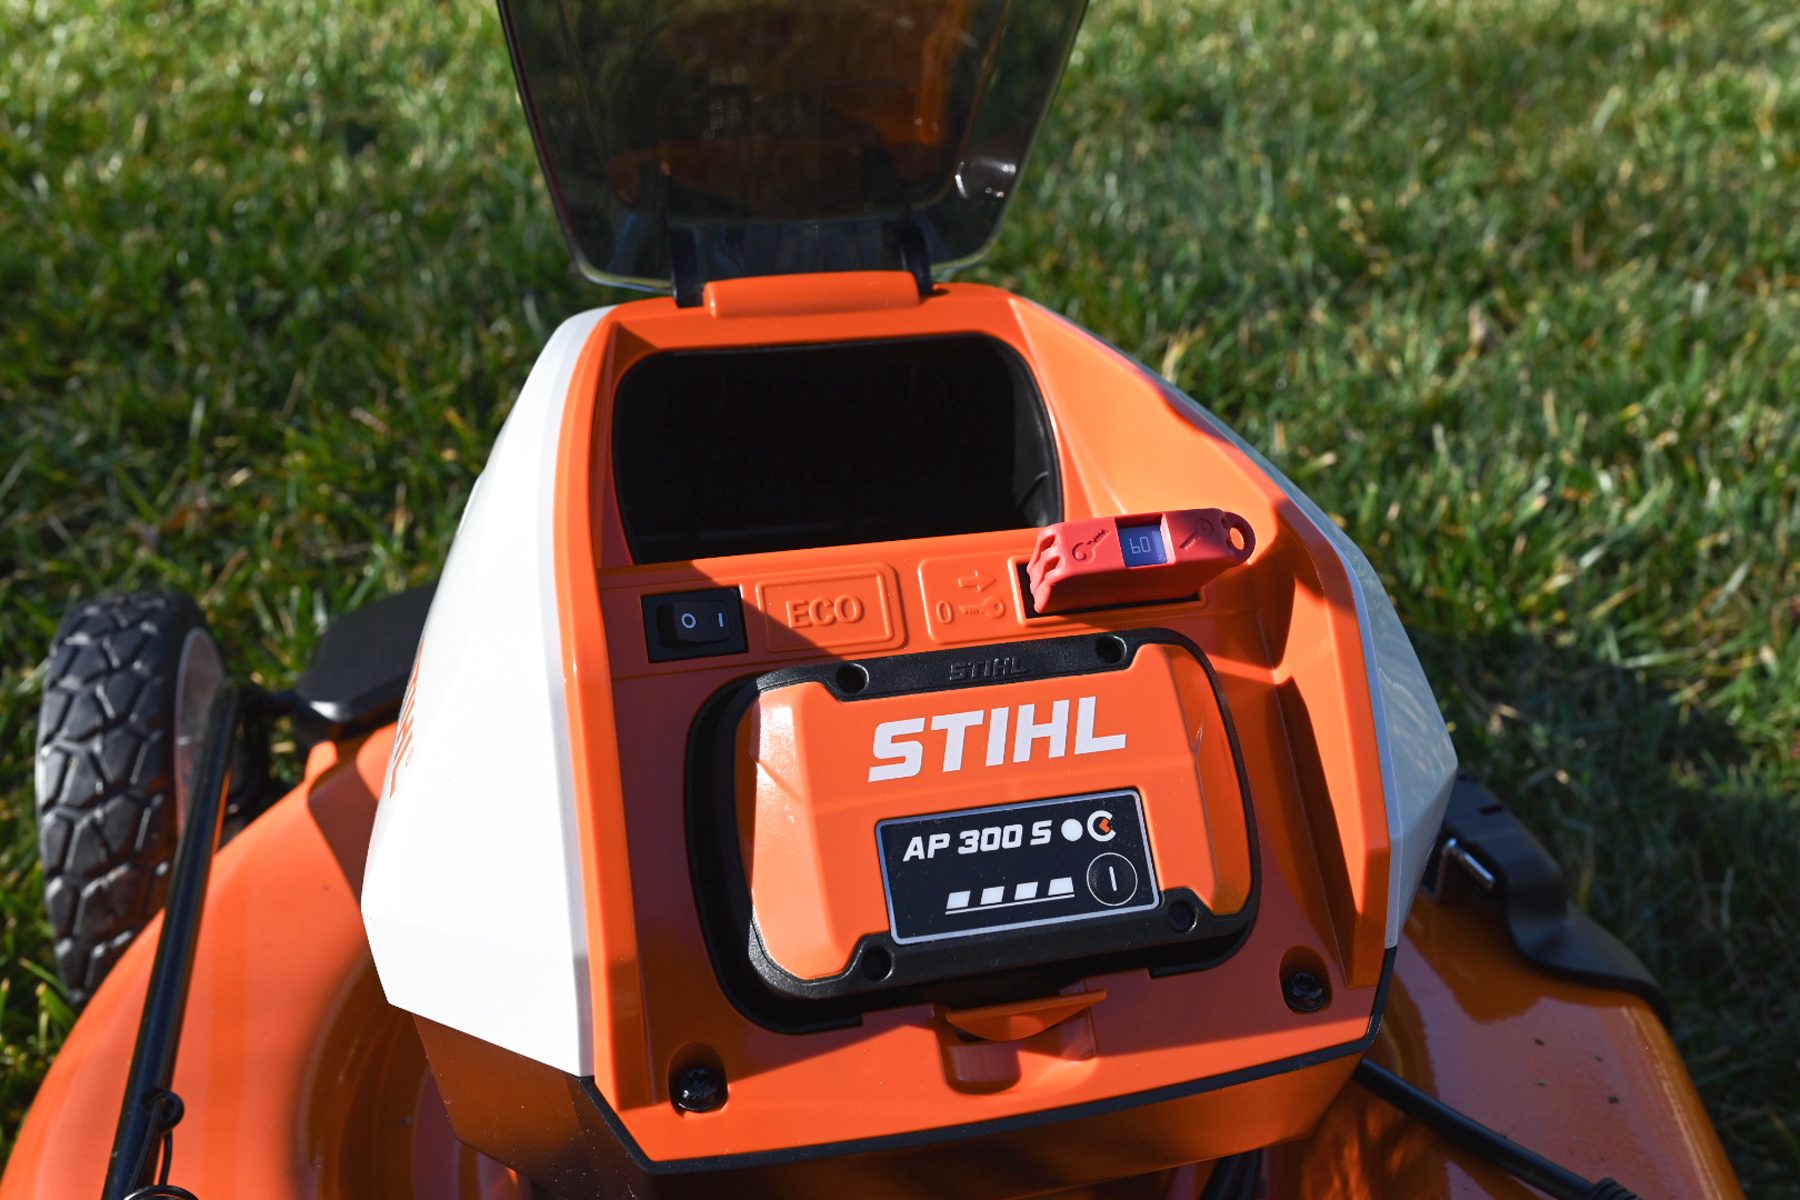 Batteries for the Stihl Electric Mower